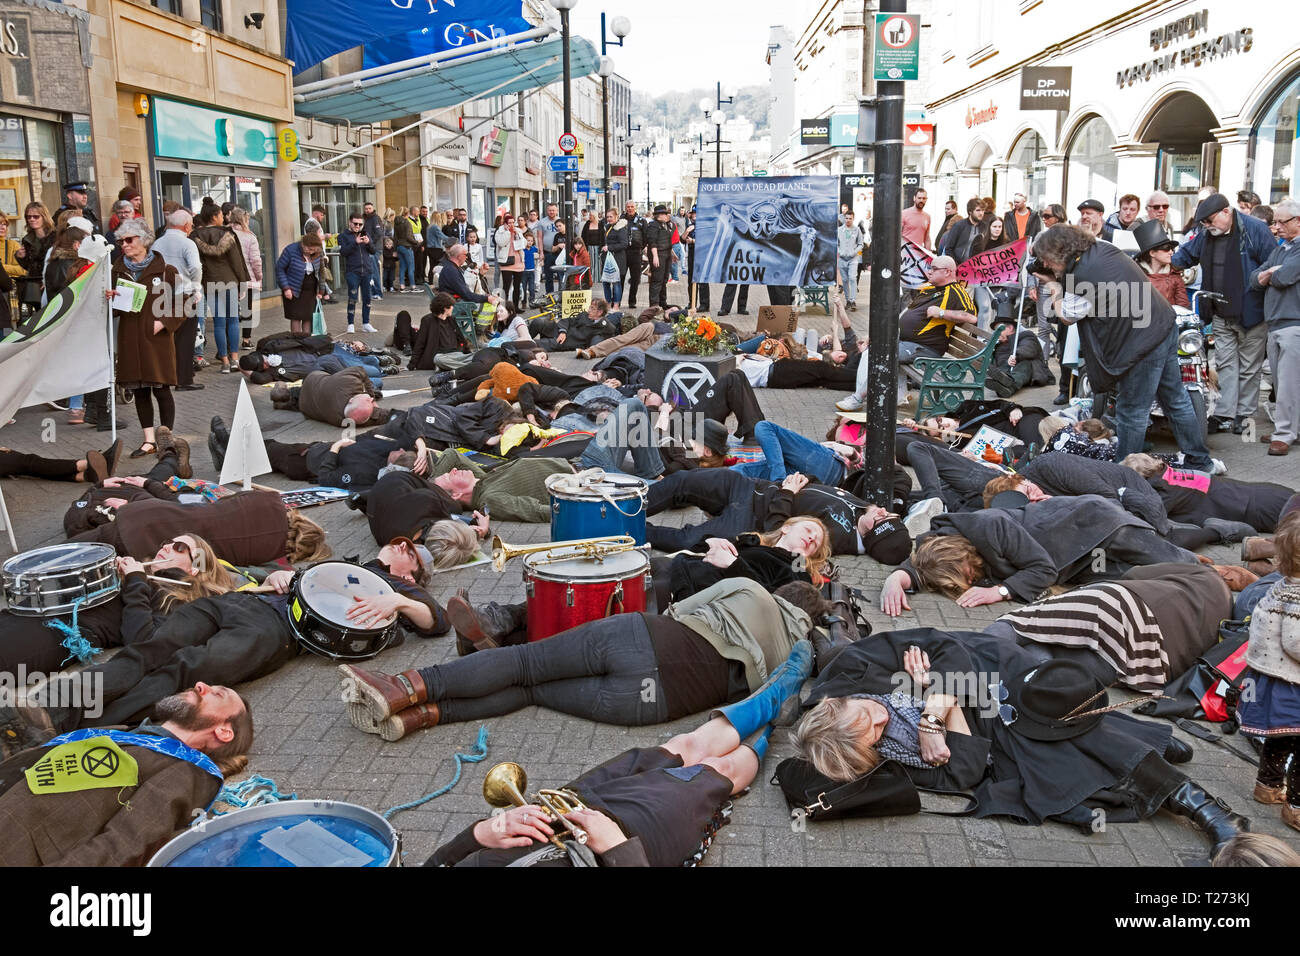 Weston-super-Mare, UK. 30th March, 2019. Protestors against climate change stage a die-in on the High Street. The demonstration was organised by Extinction Rebellion Weston-super-Mare. Keith Ramsey/Alamy Live News Stock Photo